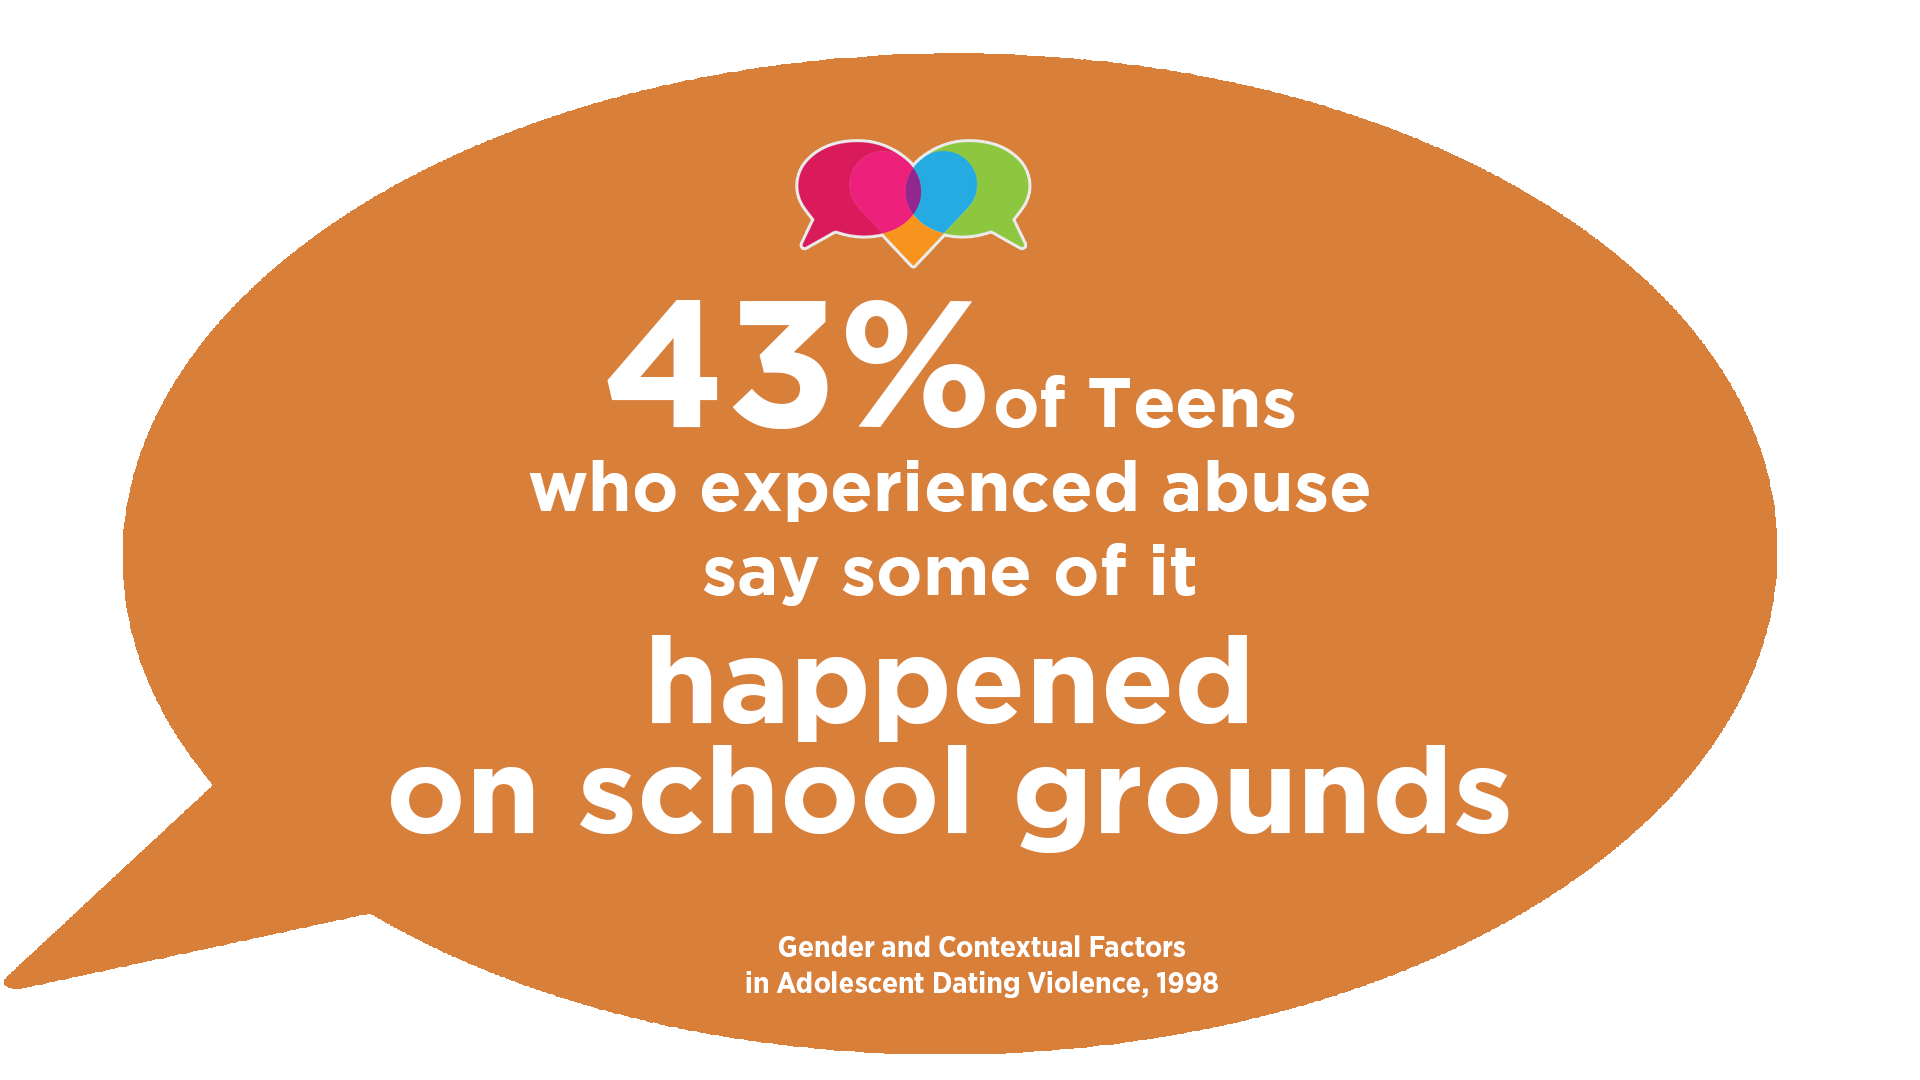 43% of teens who experienced abuse say someone it happened on school grounds.